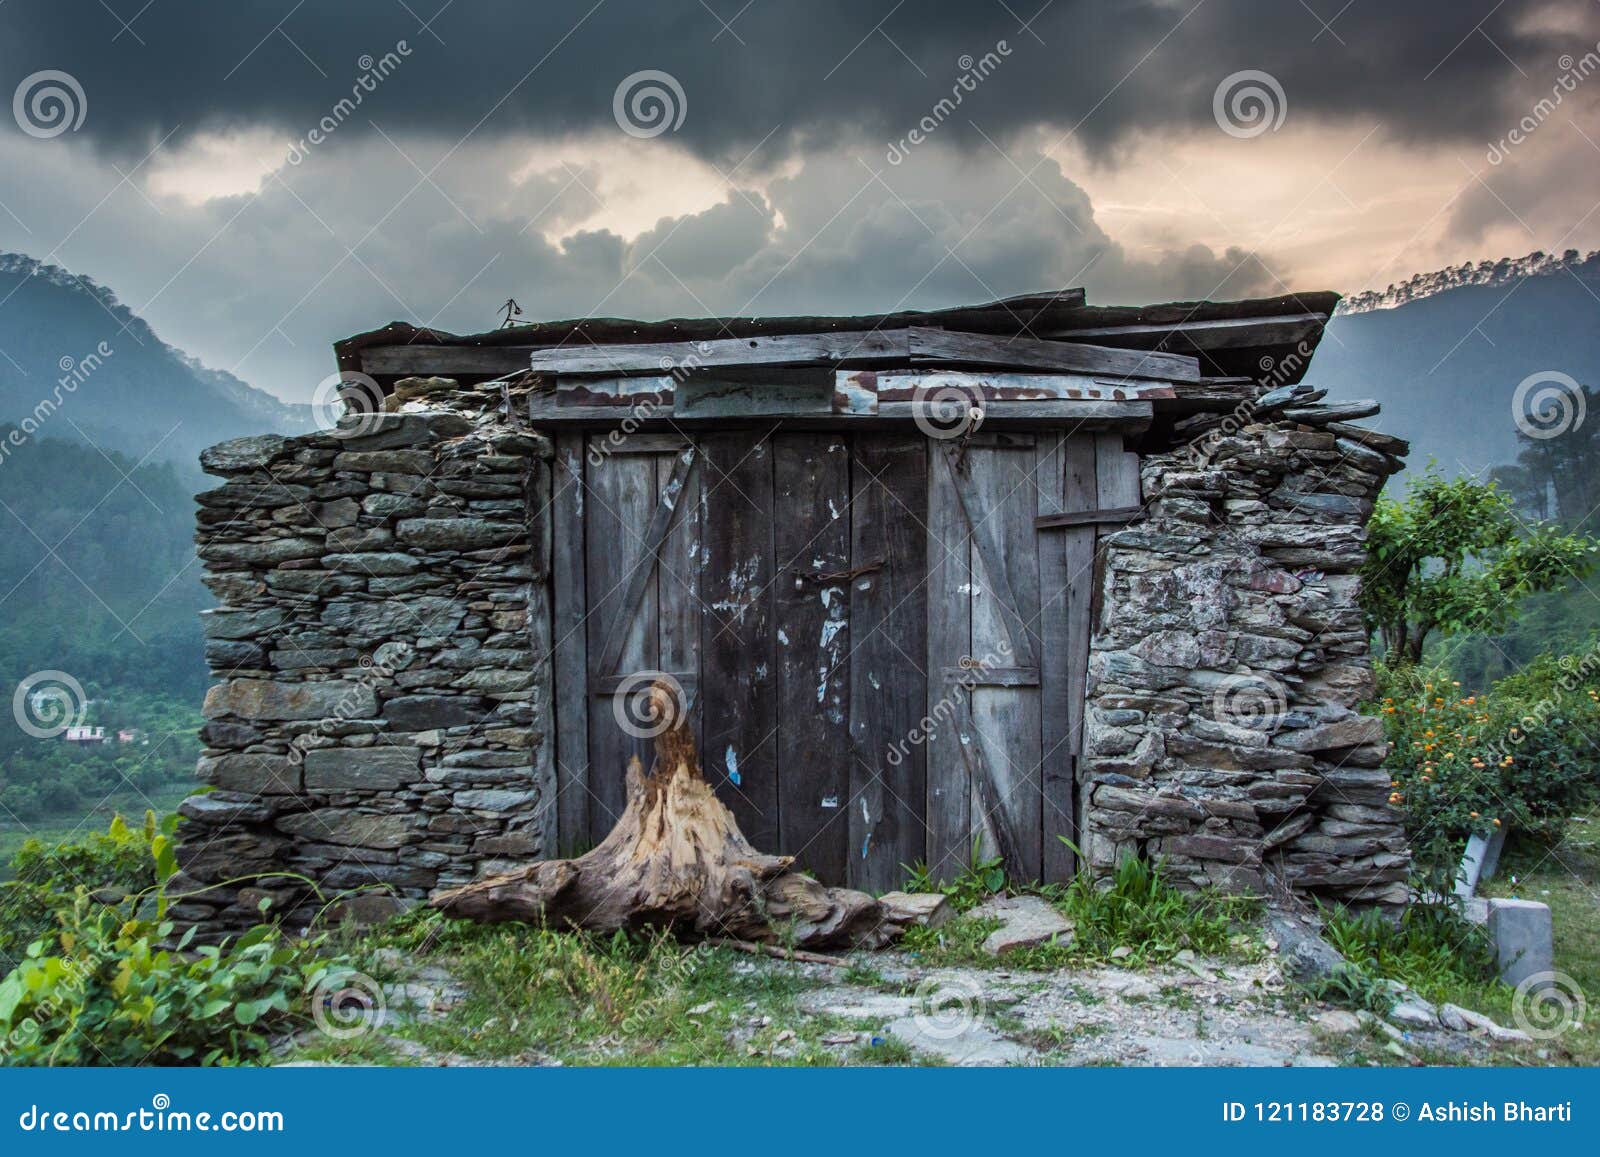 Ruins of a House in the Mountains with Clouds and Mountains in the ...